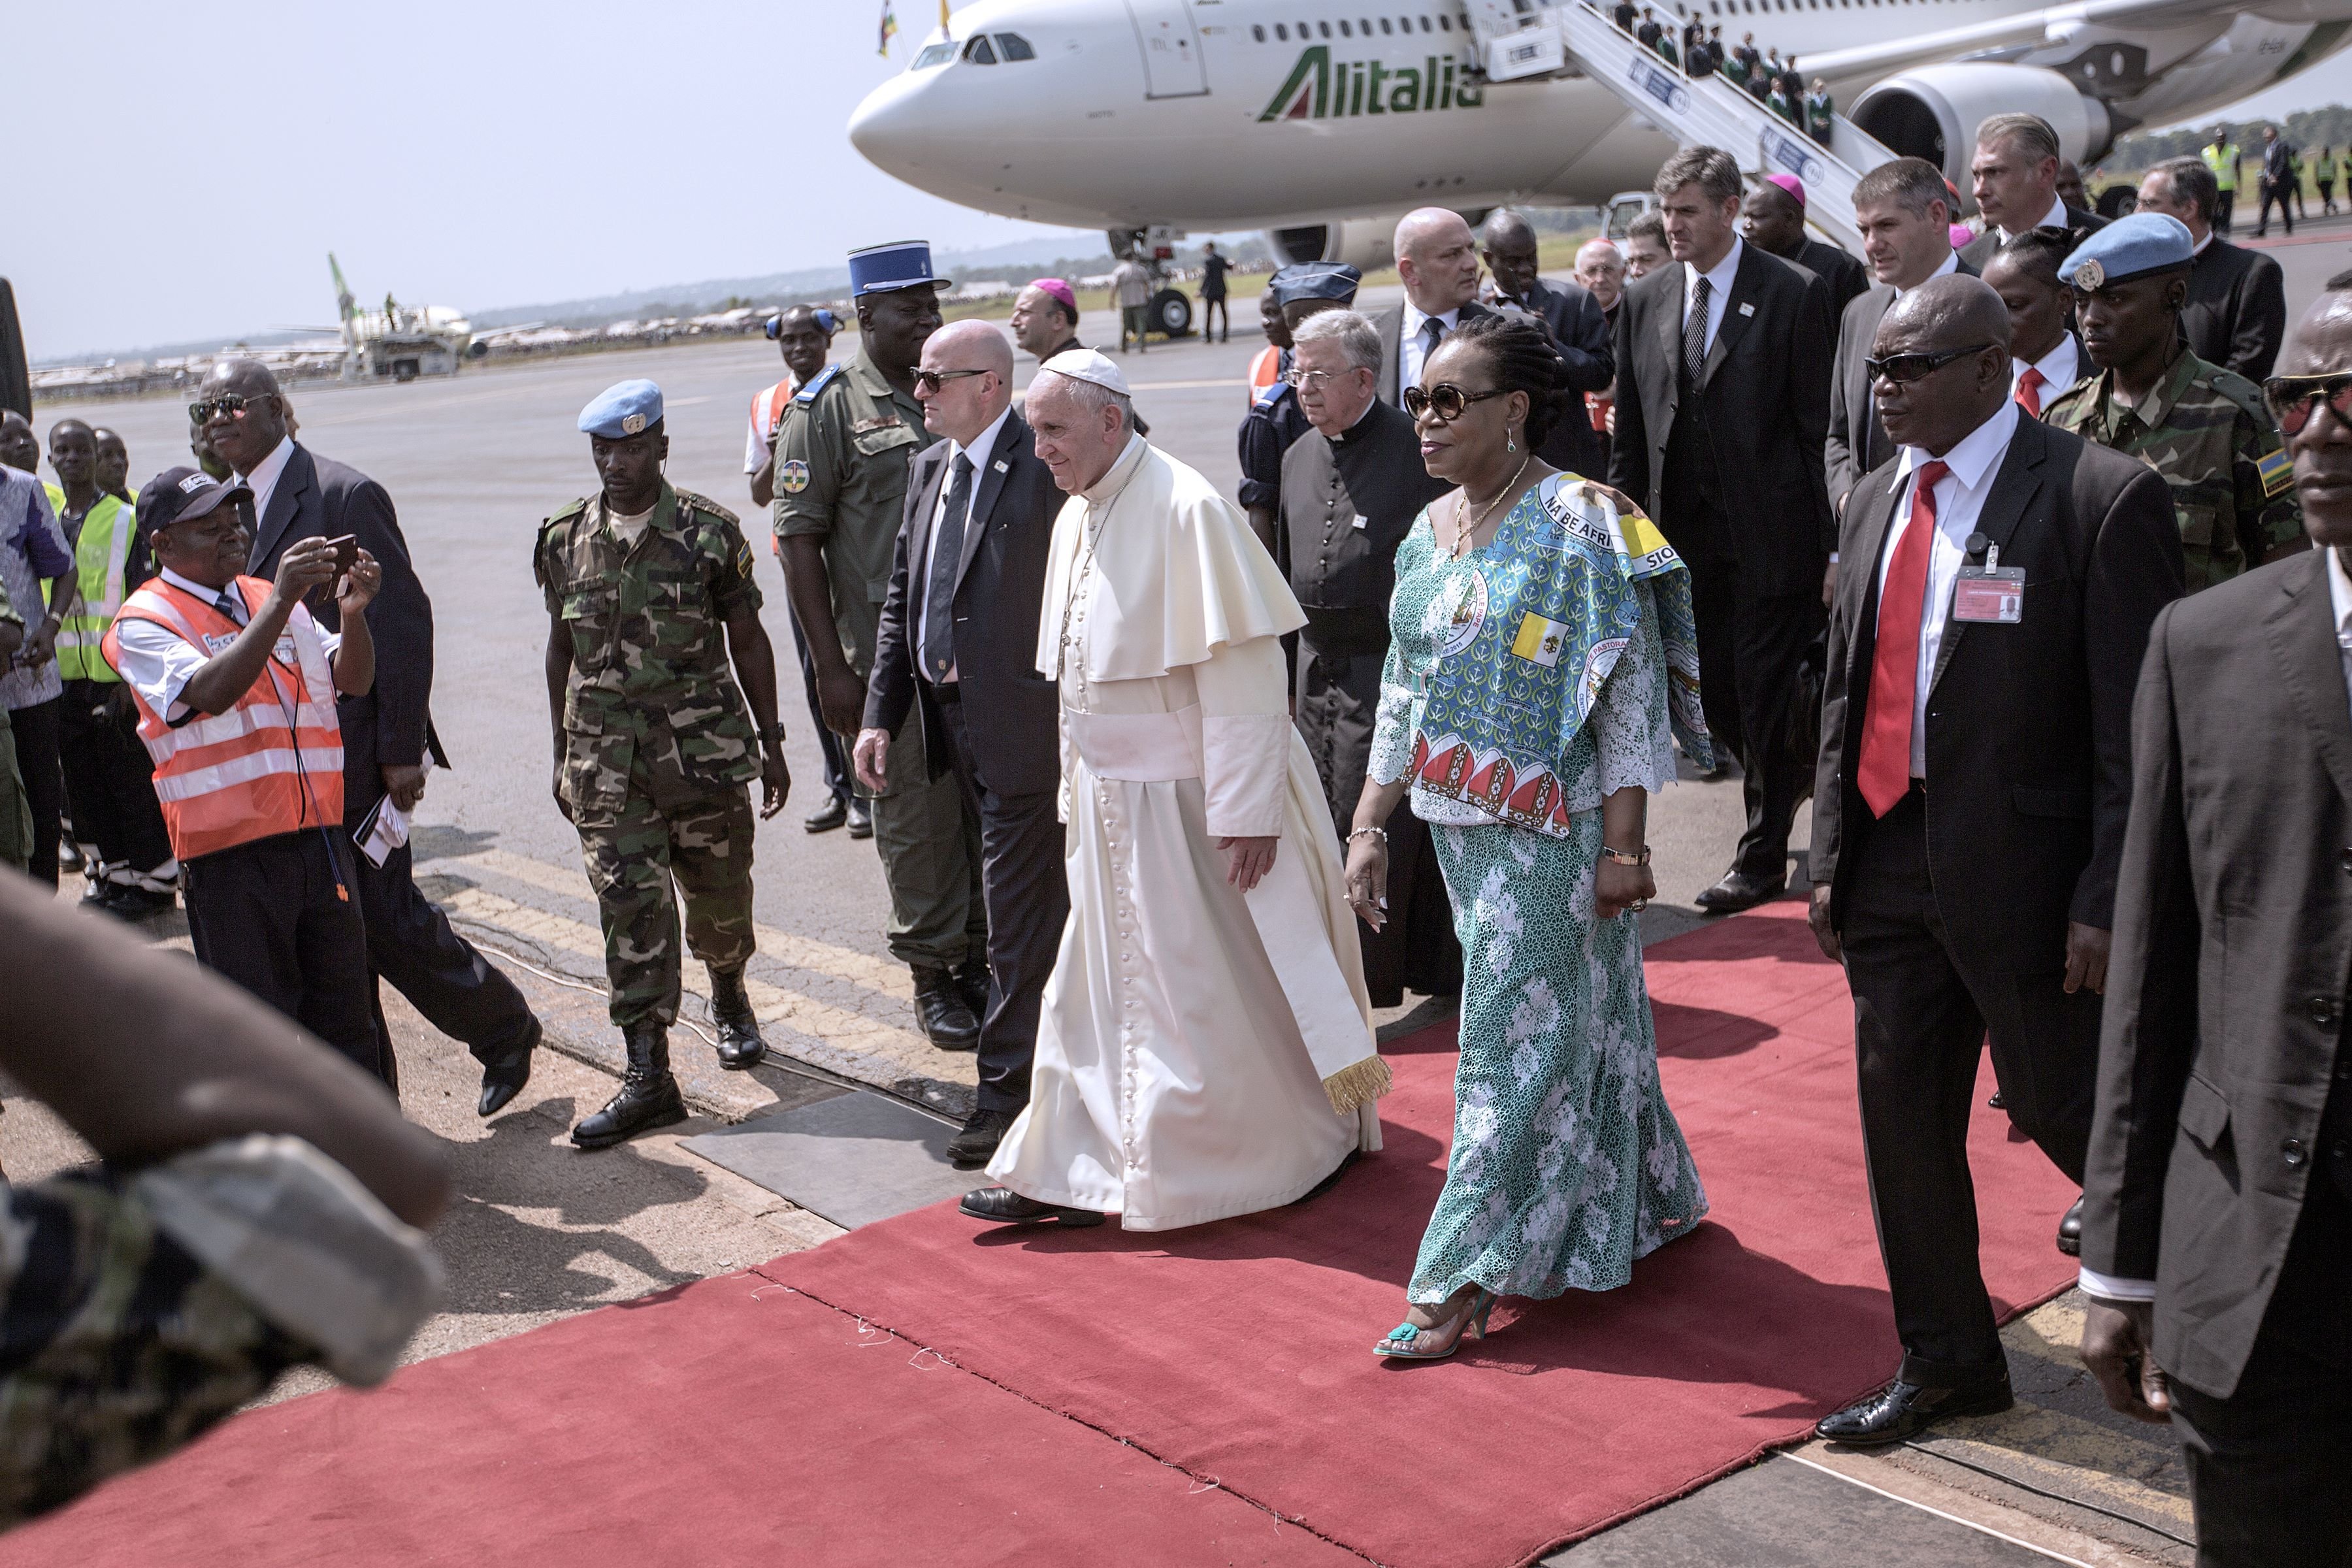 Central African Republic interim president Catherine Samba-Panza welcomes Pope Francis upon his arrival in Bangui, Central African Republic on Nov. 29, 2015.